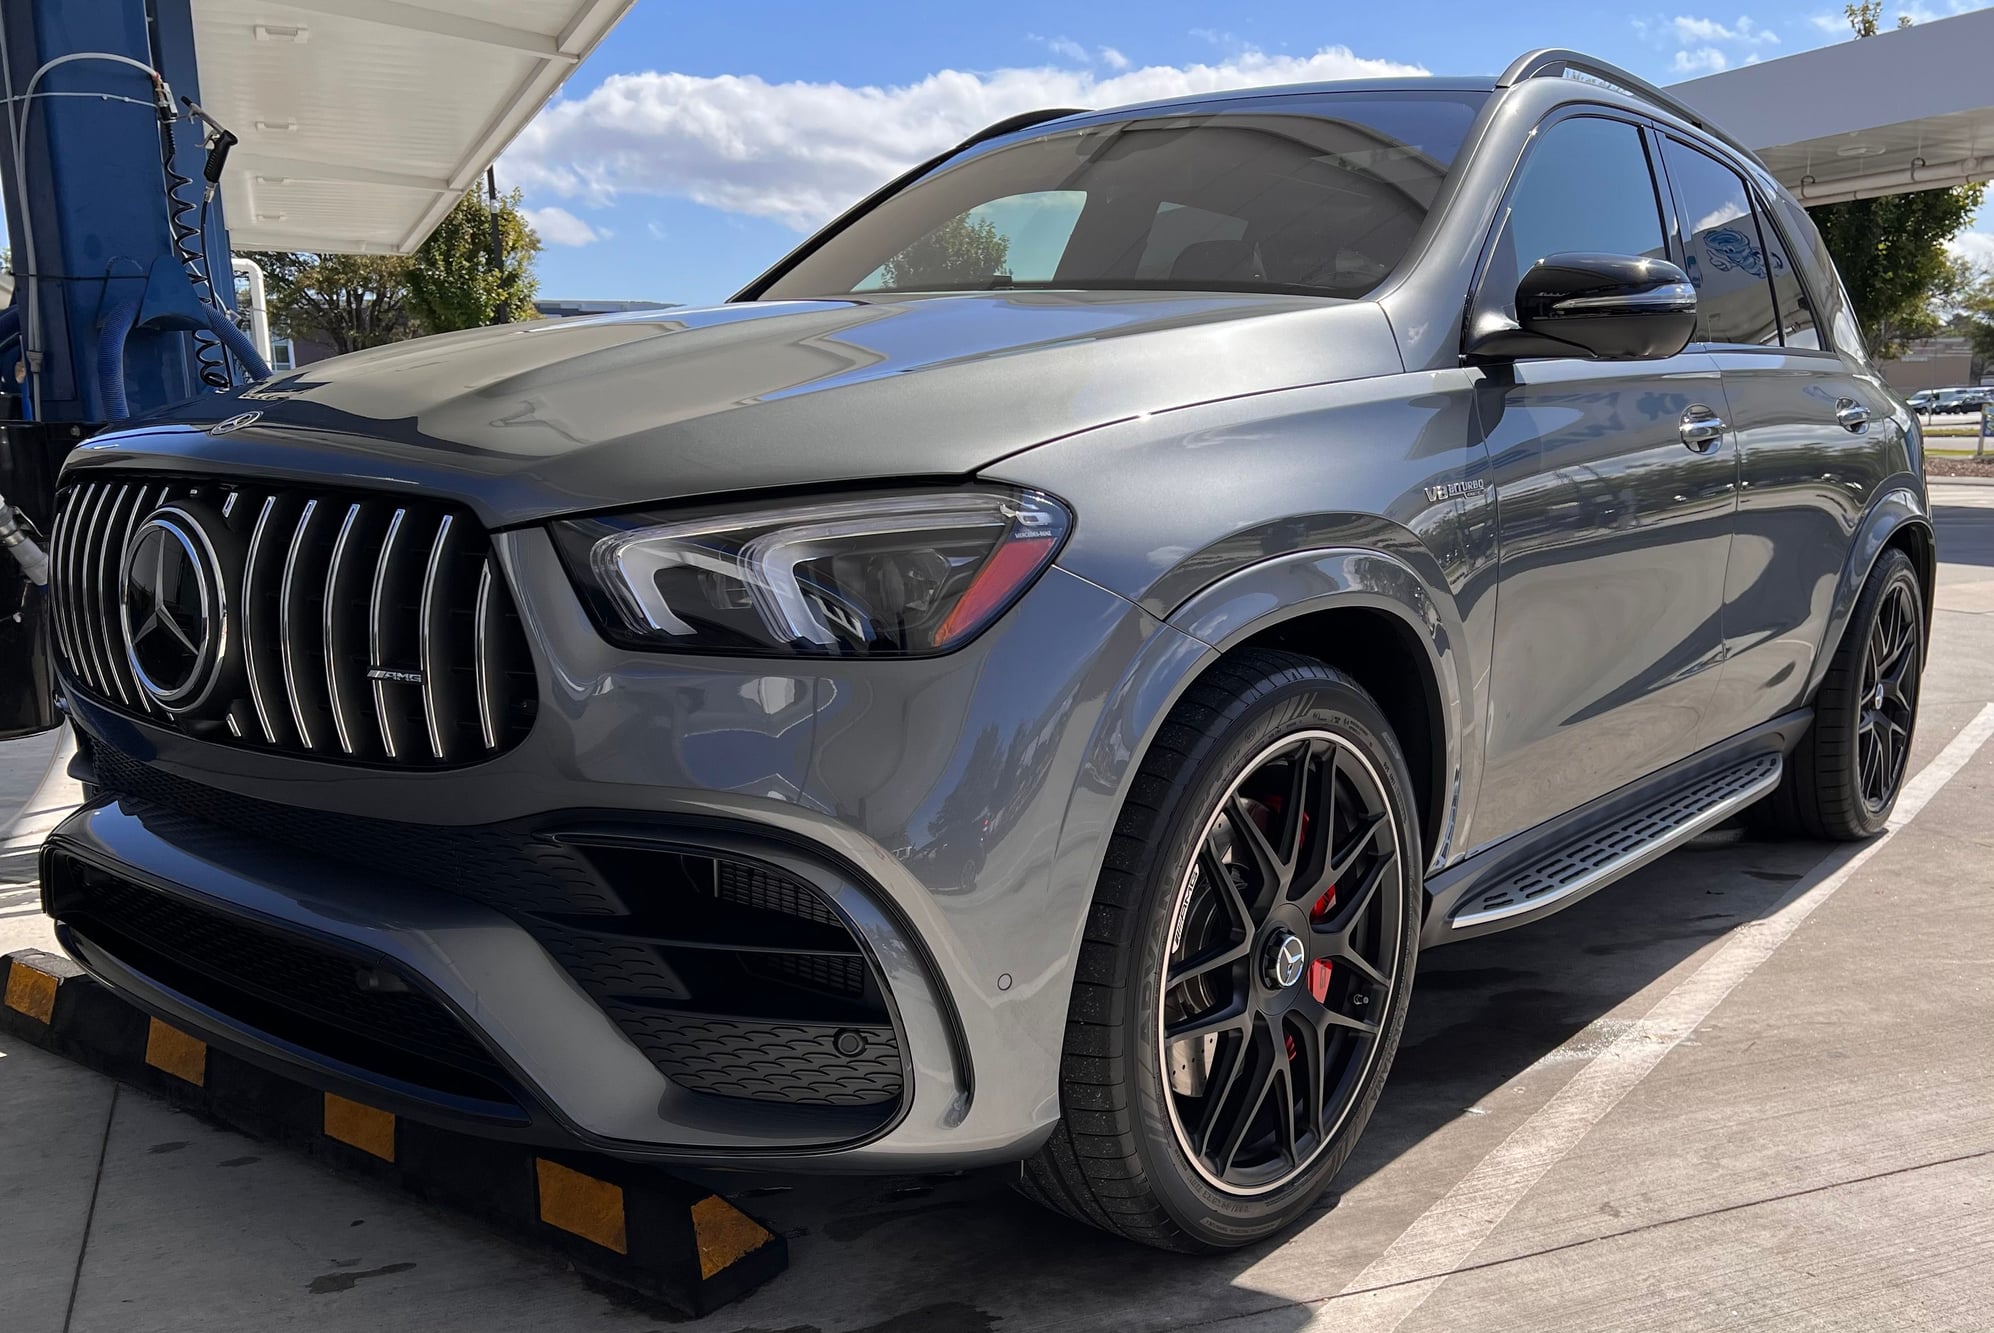 2022 Mercedes-Benz GLE-Class - AMG 63S Perfect - Used - VIN 4JGFB8KB5NA815079 - 3,900 Miles - 8 cyl - AWD - Automatic - SUV - Gray - Virginia Beach, VA 23451, United States